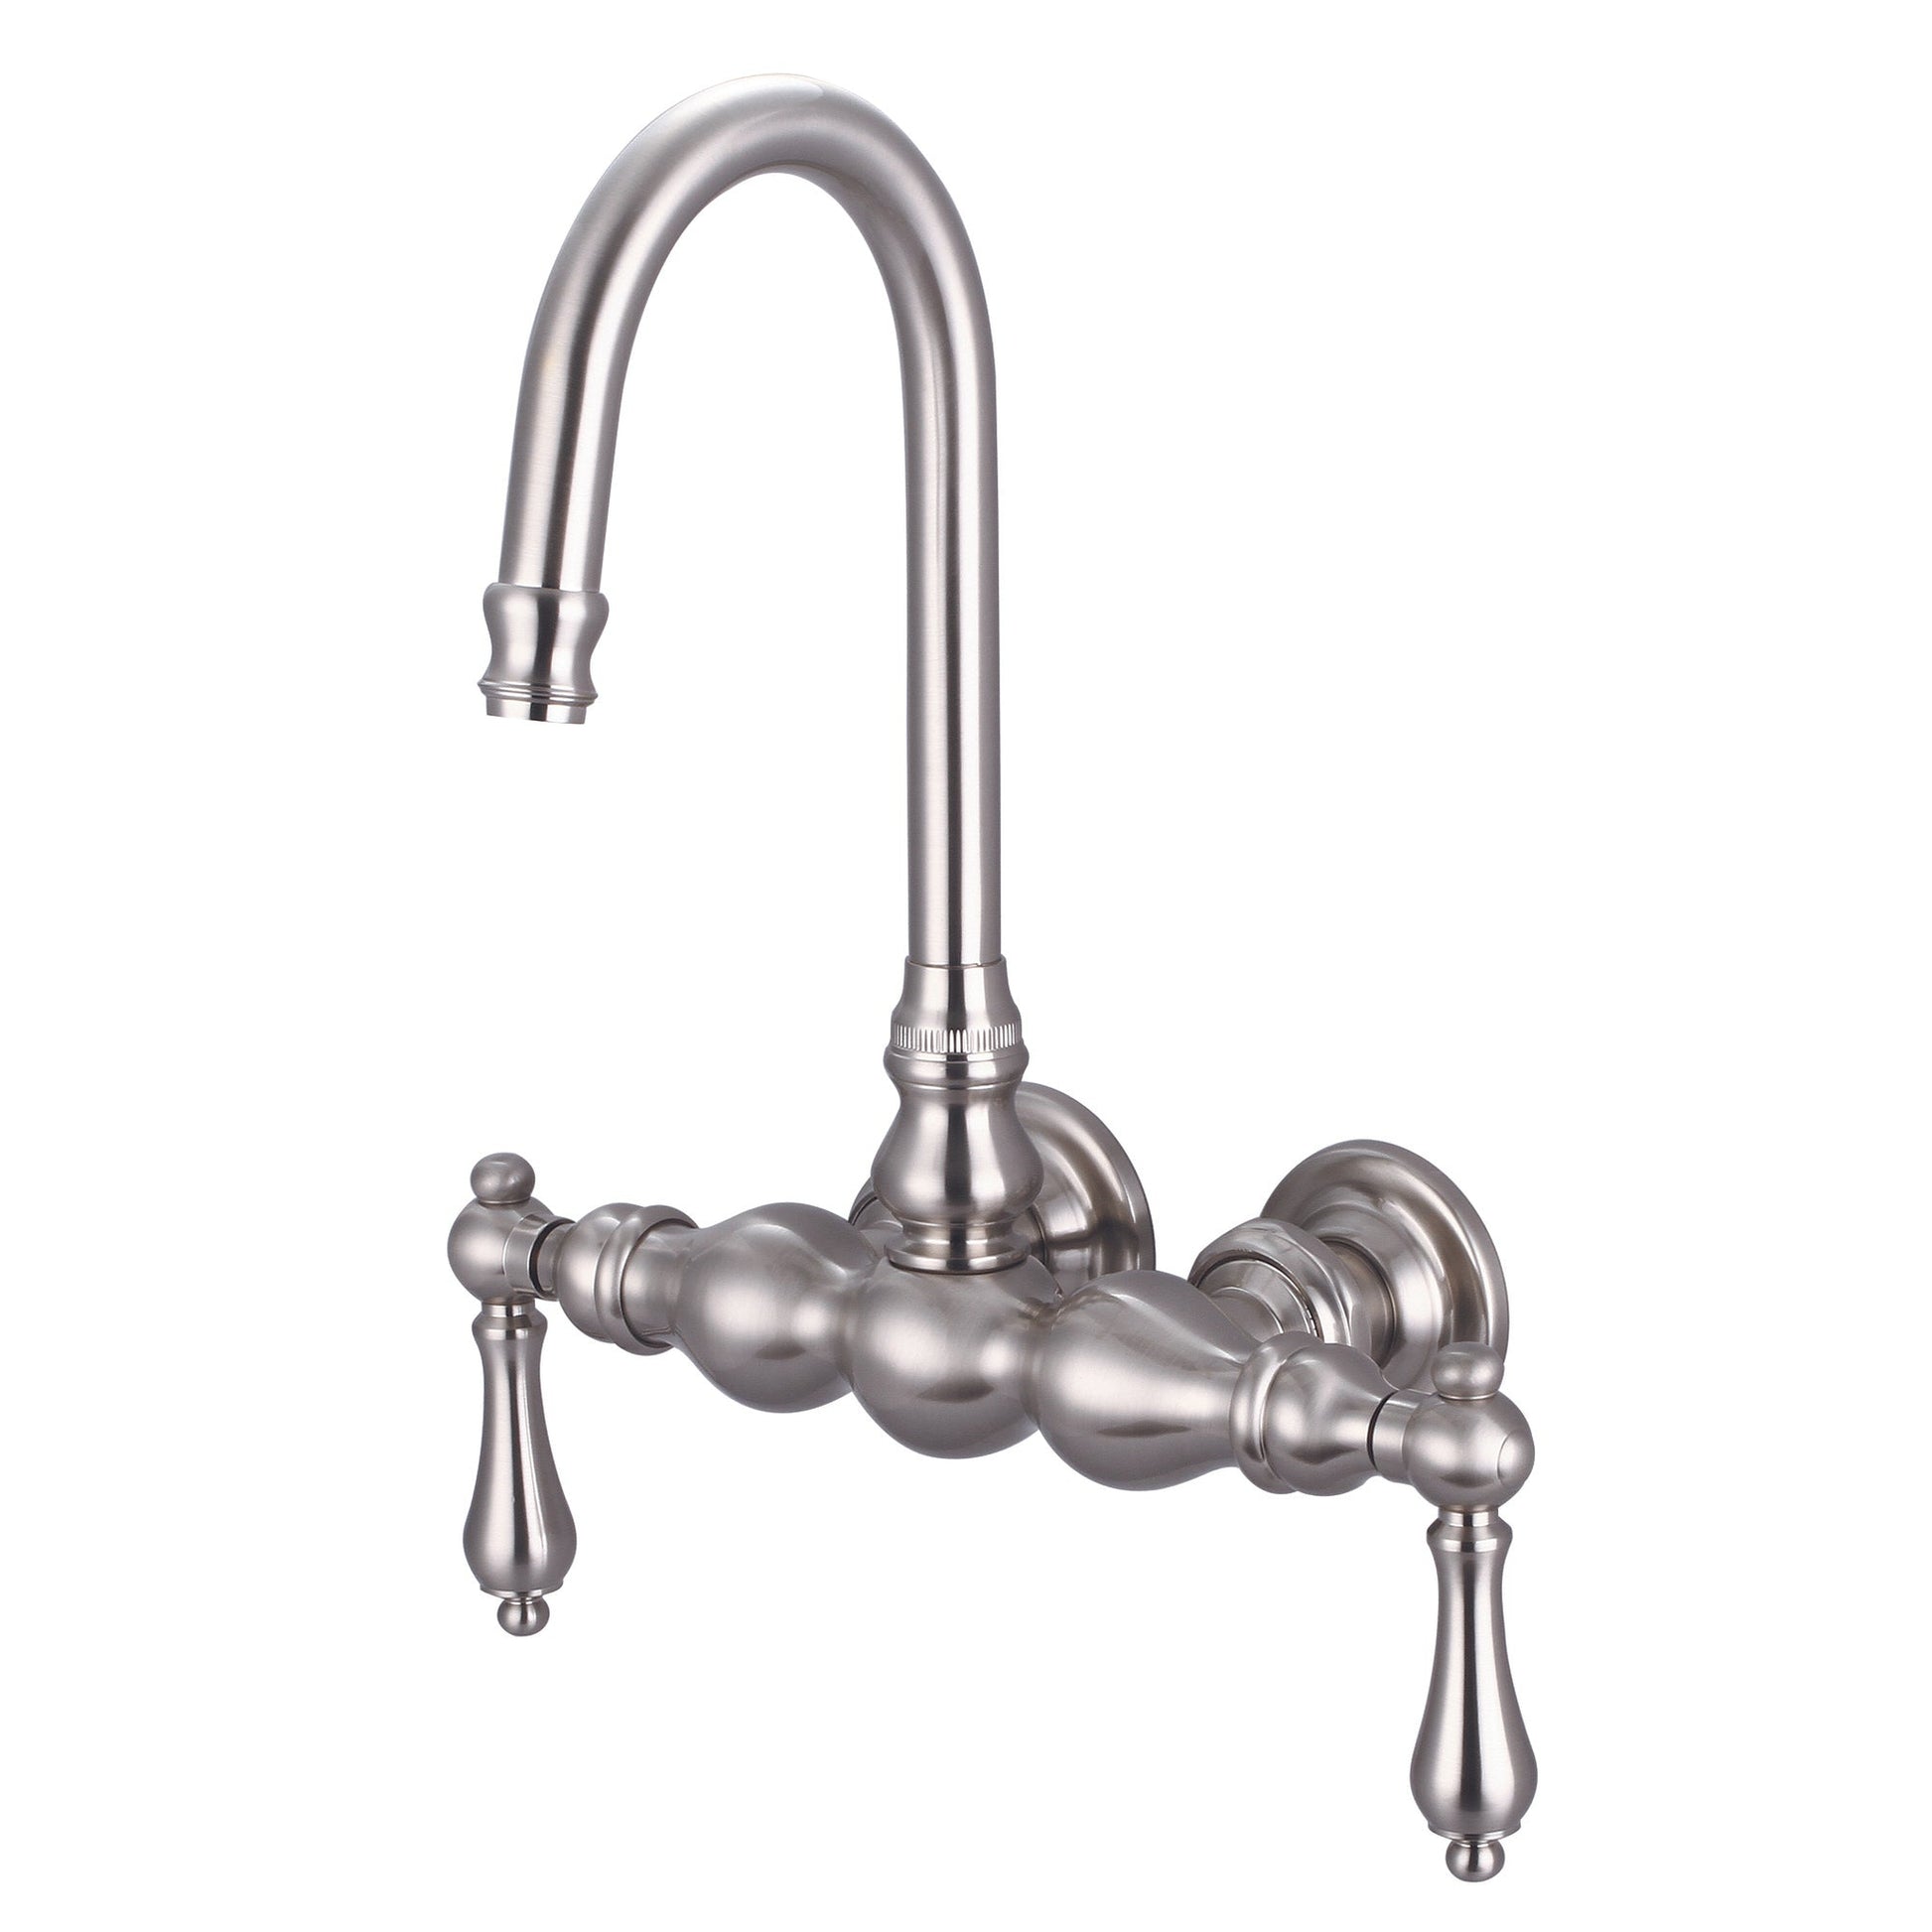 Water Creation Vintage Classic Center Wall Mount Tub F6-0014 9.25" Grey Solid Brass Faucet With Gooseneck Spout And Straight Wall Connector And Metal Lever Handles Without Labels